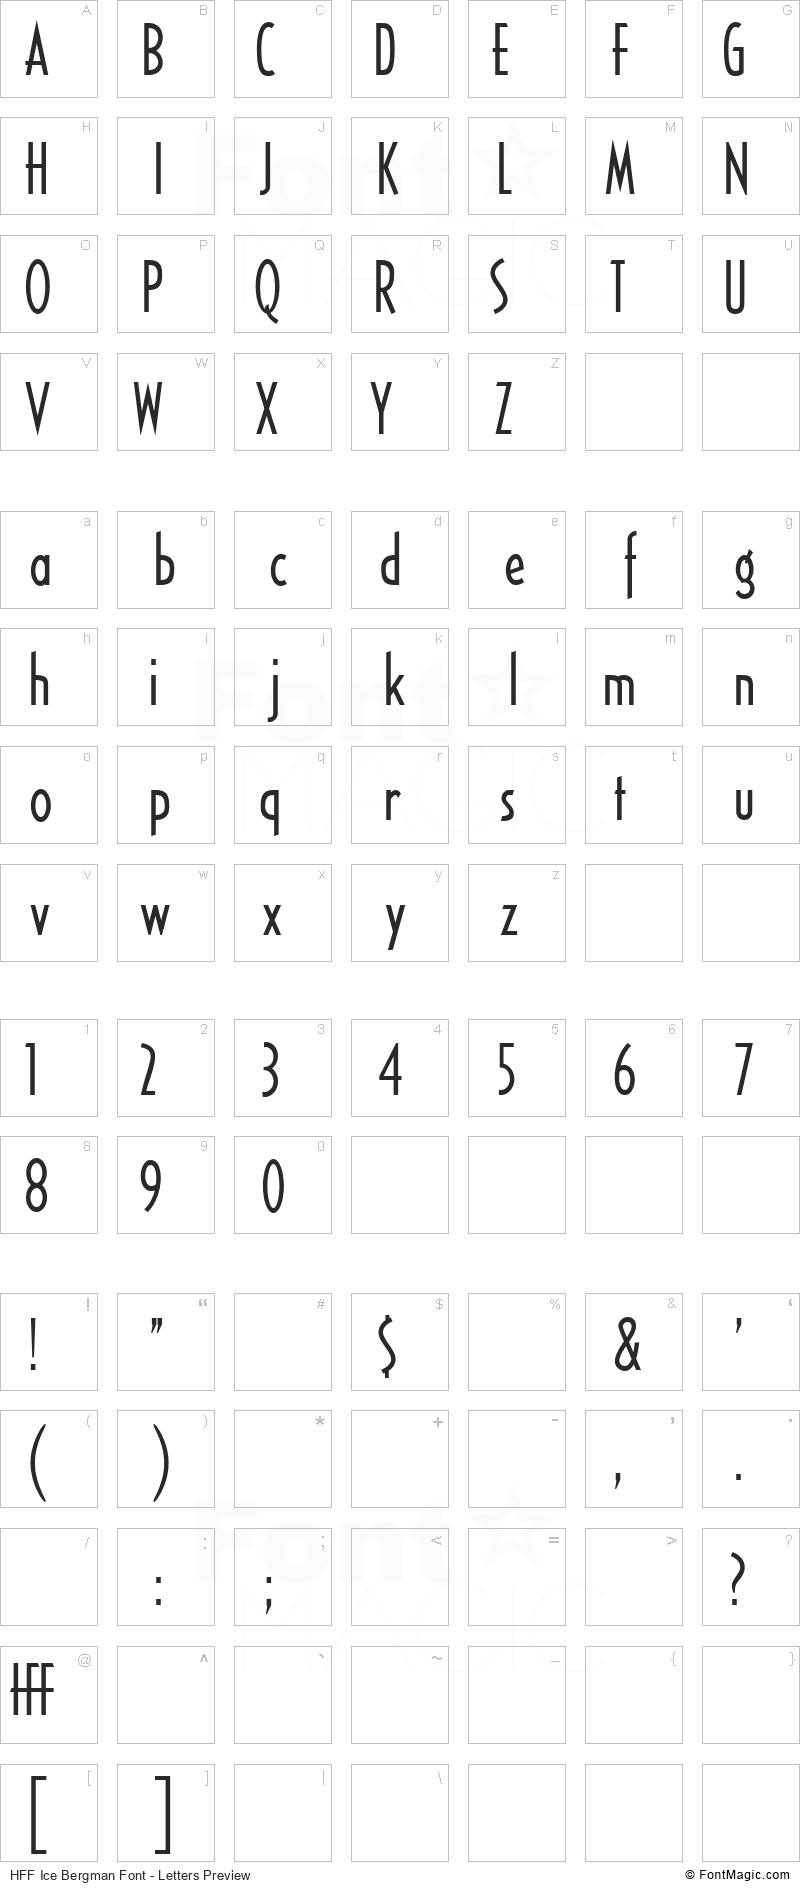 HFF Ice Bergman Font - All Latters Preview Chart